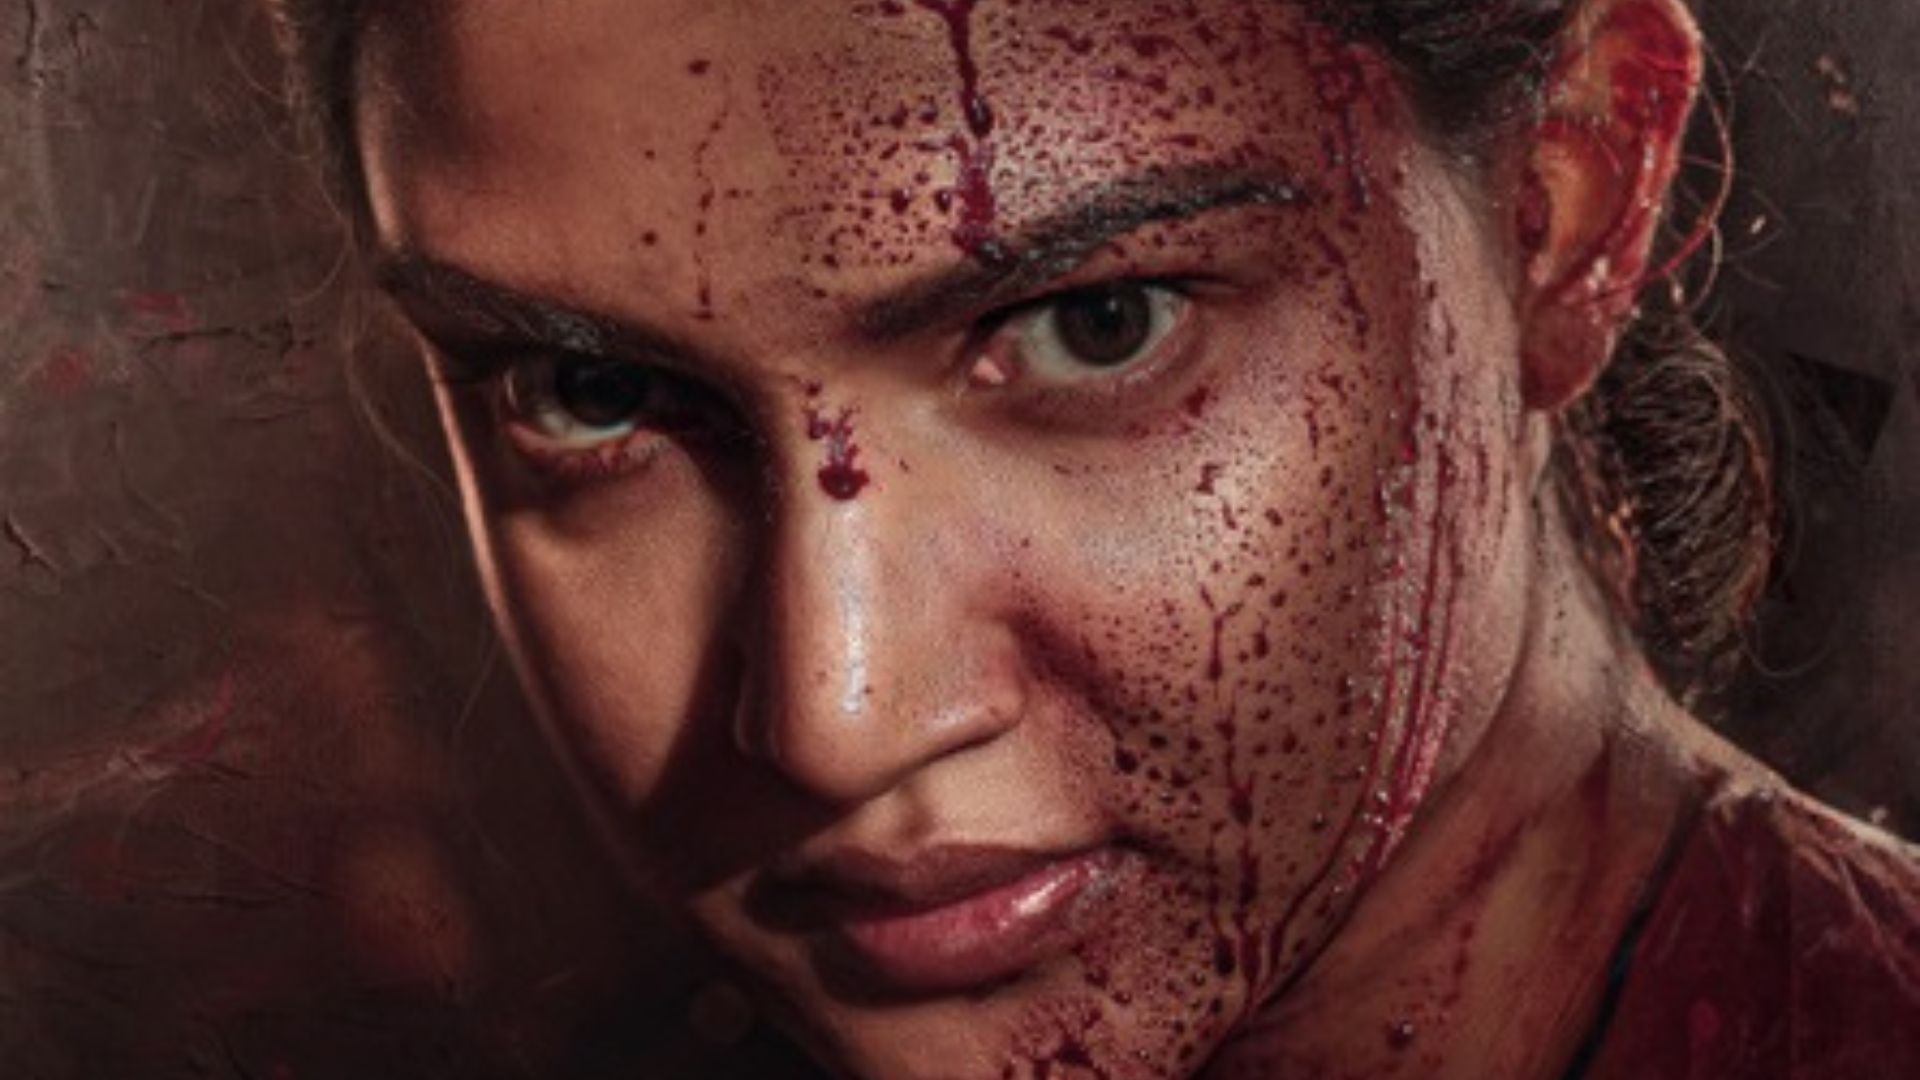 Rachel teaser out now: A violent version of Honey Rose is coming.